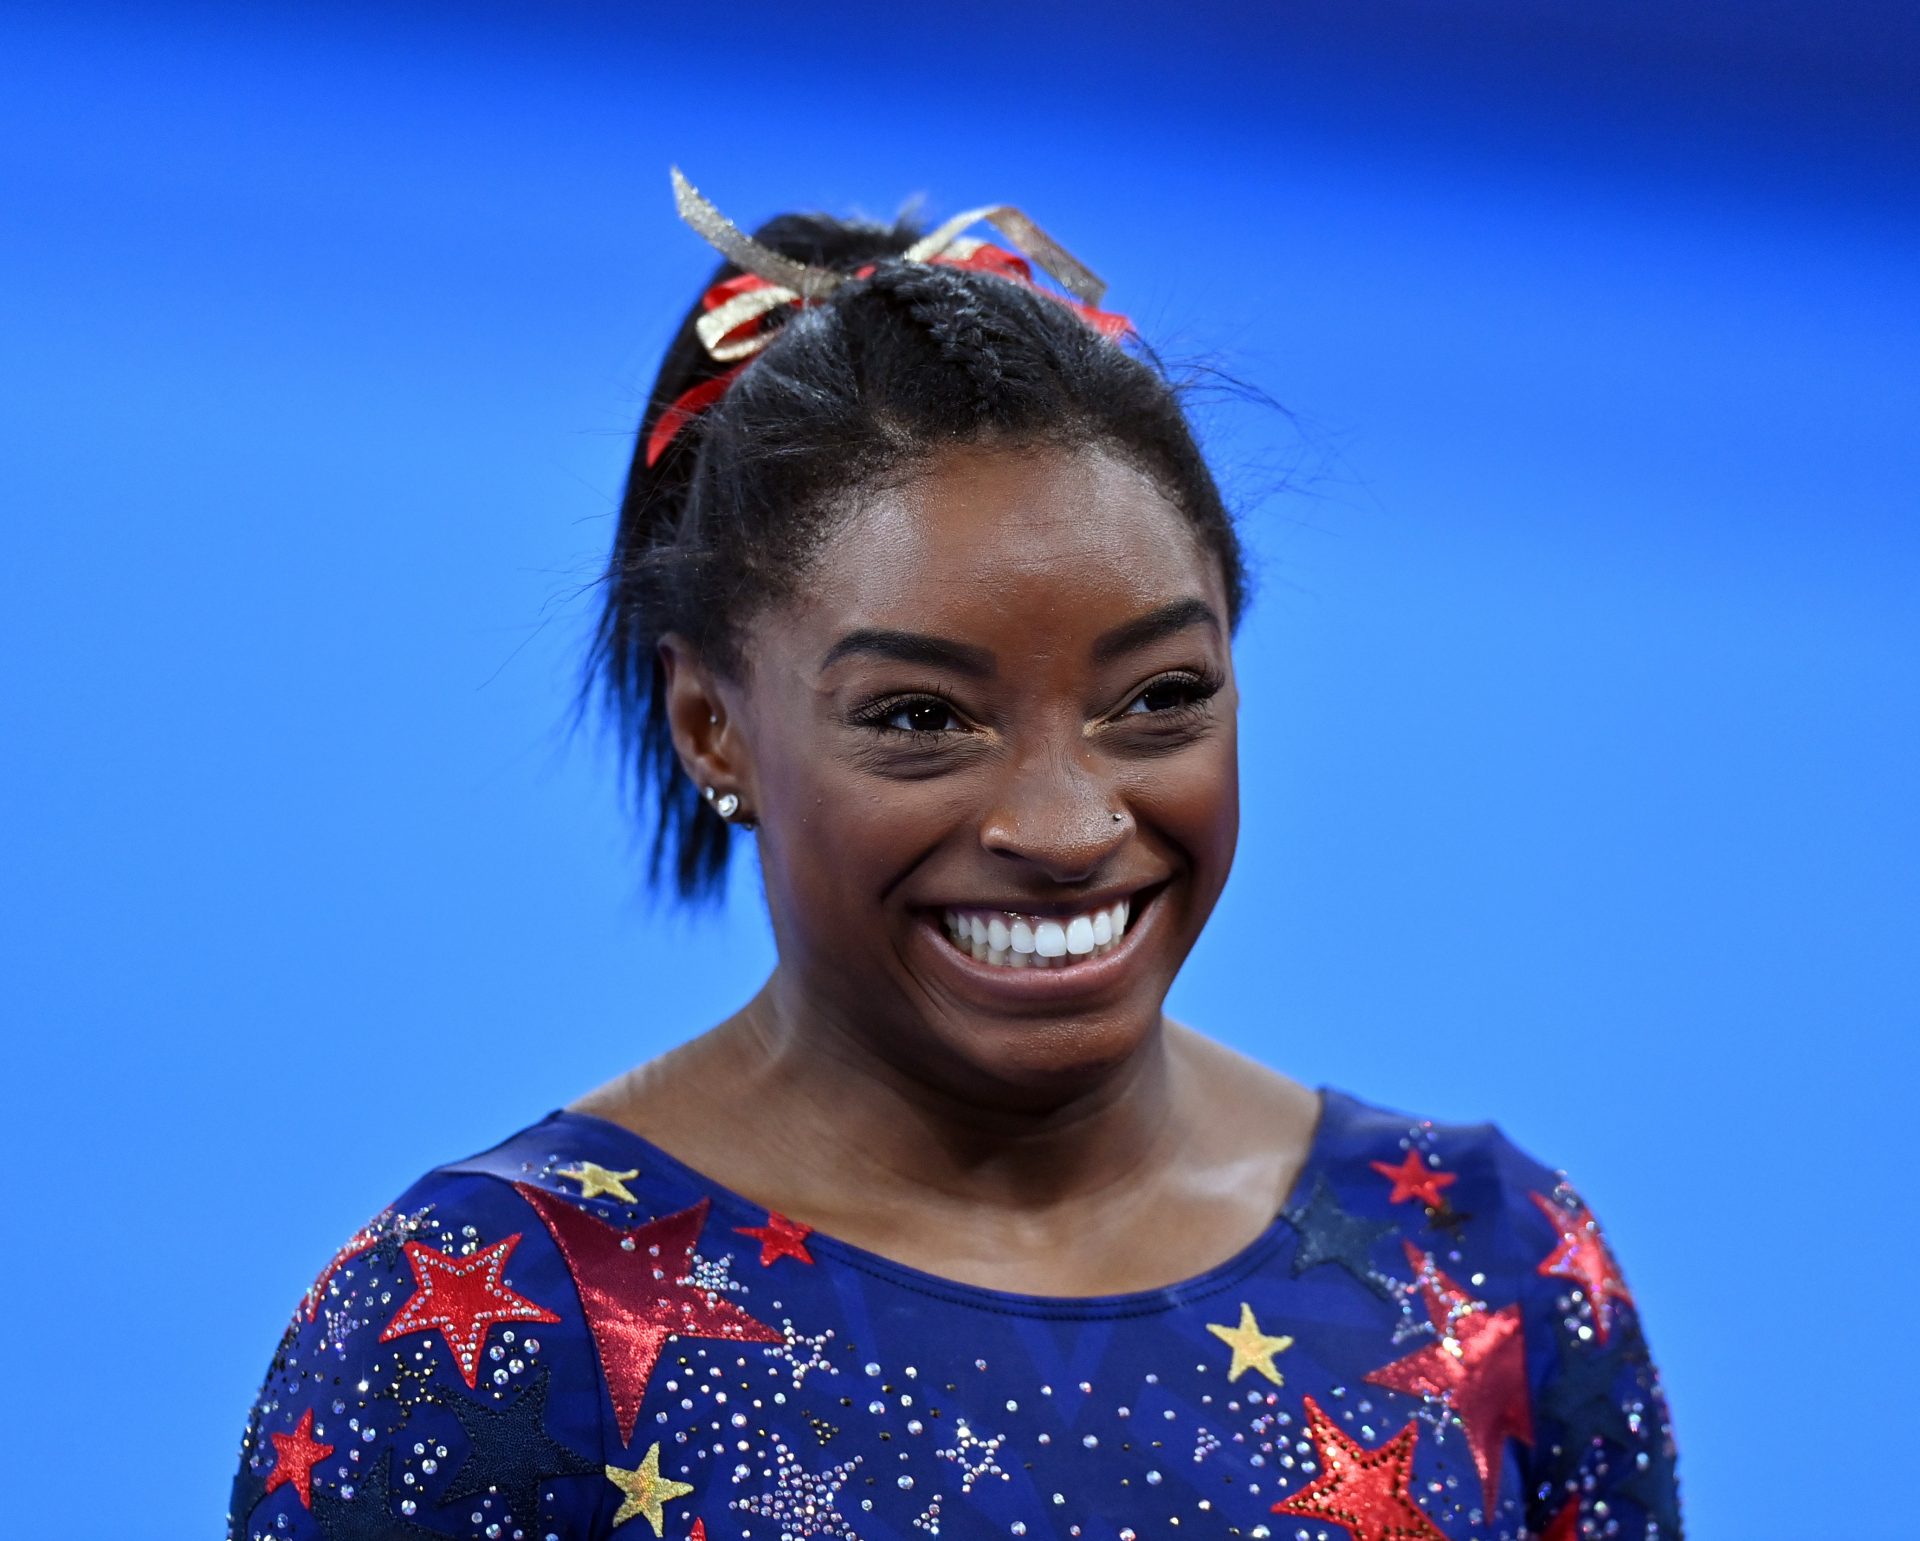 Simone Biles Exquisite Qualified For Every Gymnastics Closing at the Tokyo Olympics